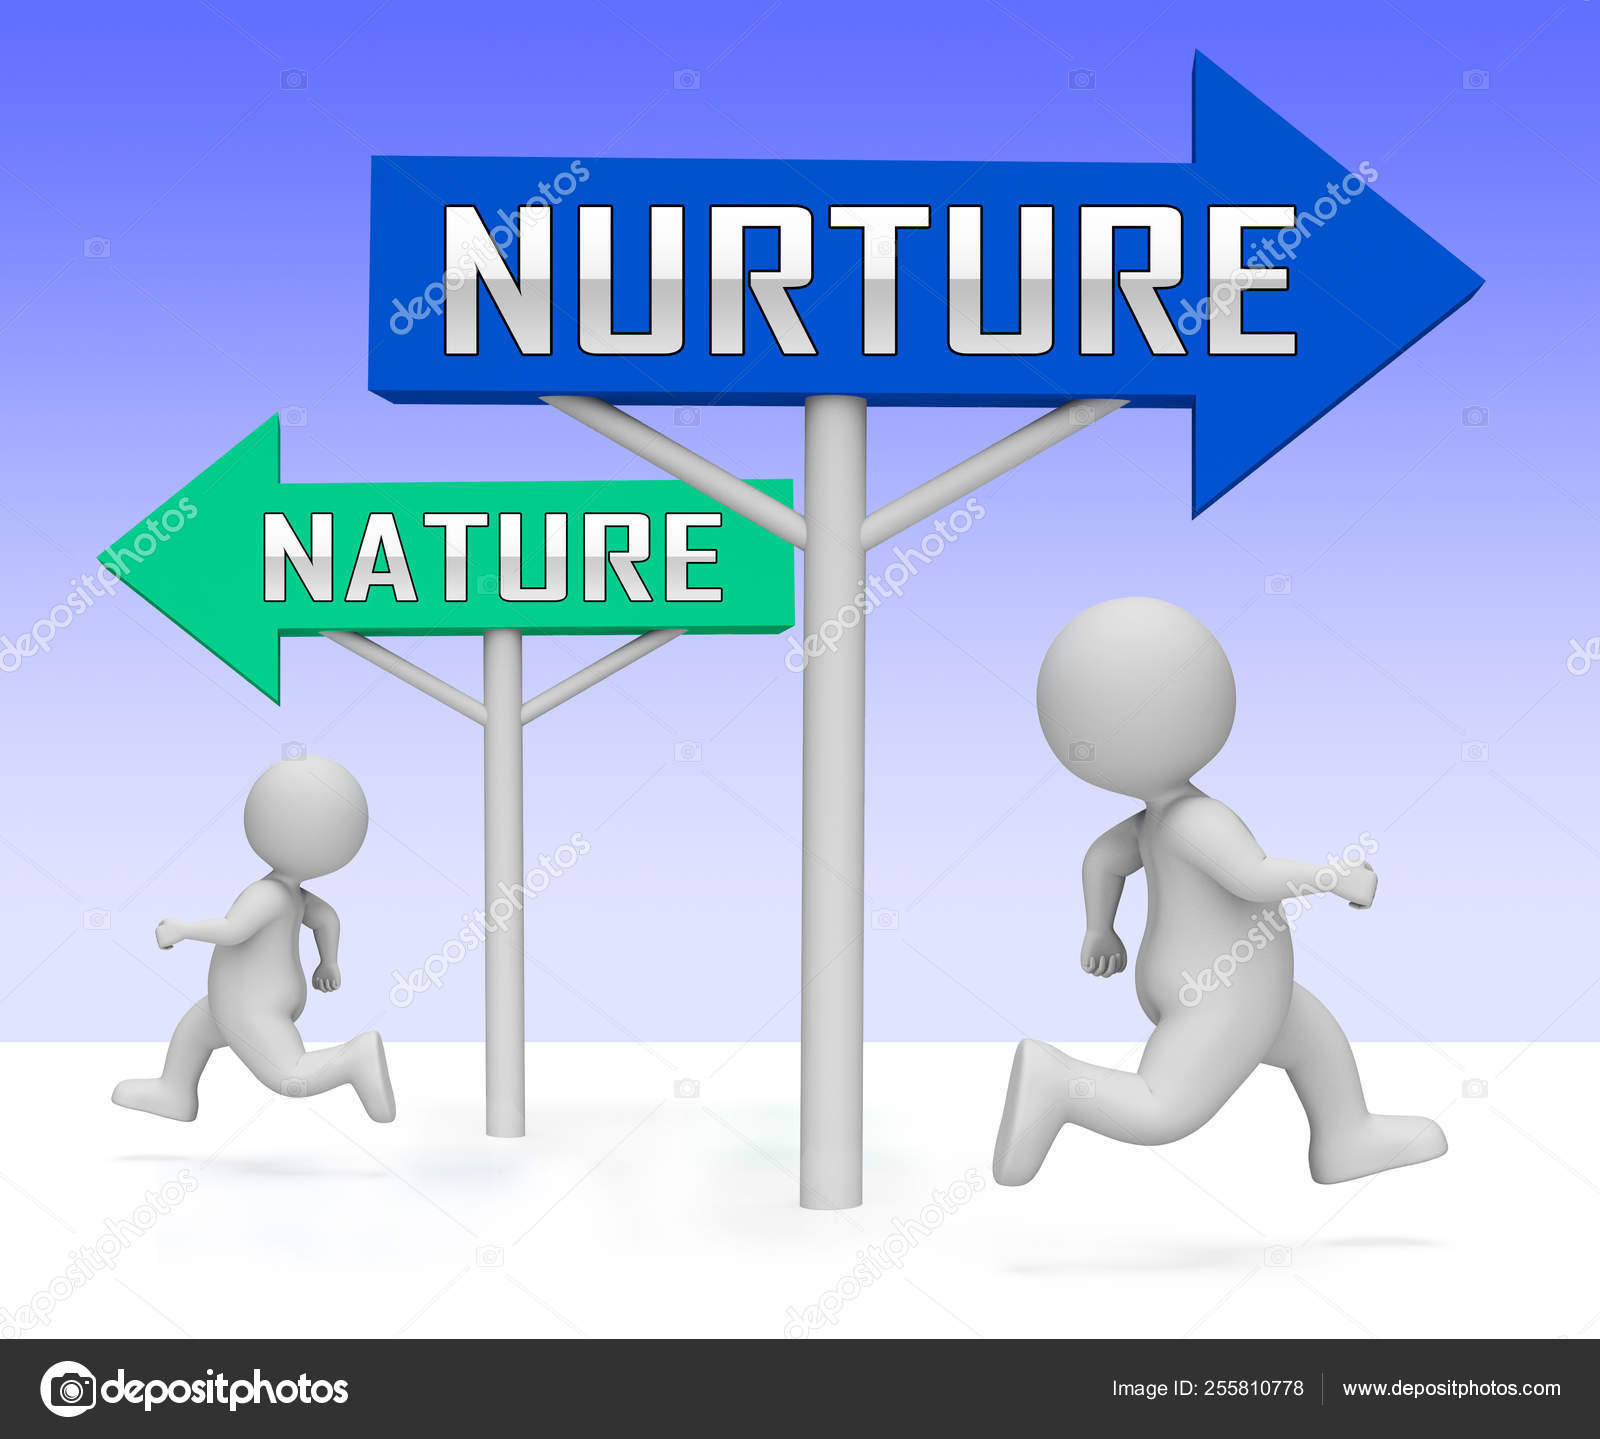 what does nature vs nurture mean